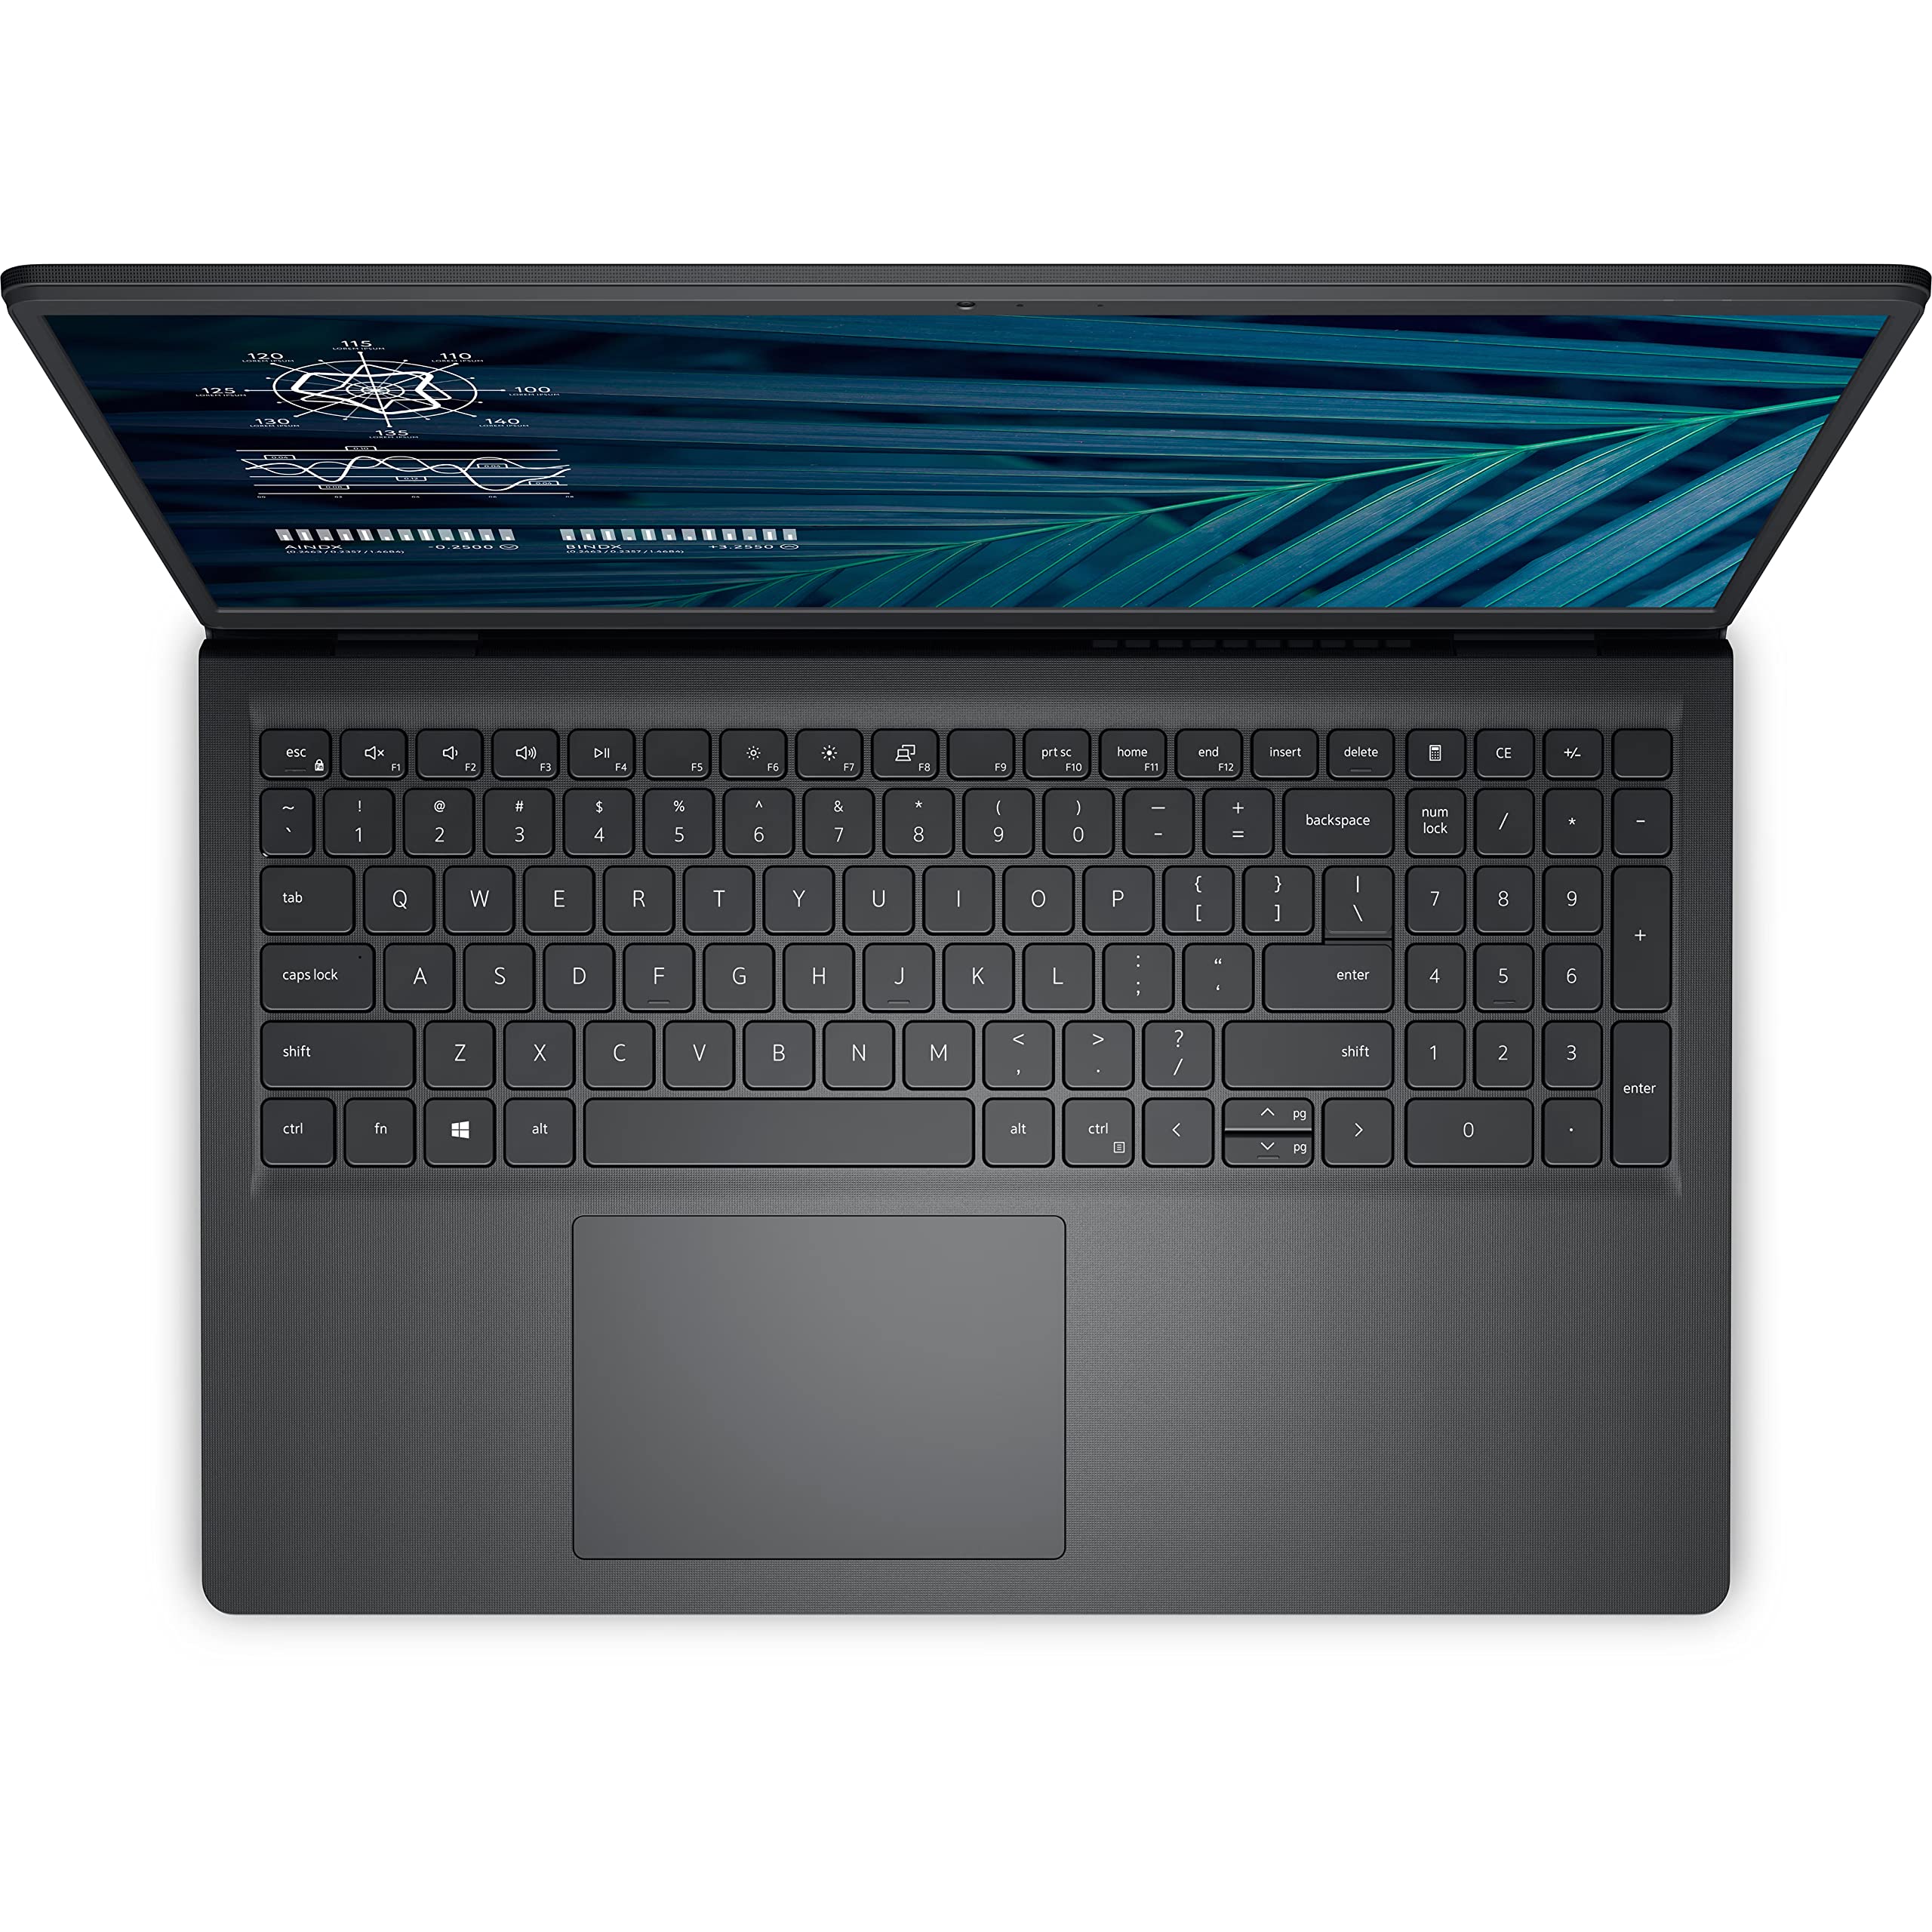 Dell Vostro 3510 Business Laptop, 15.6" FHD Computer, Intel Quad-Core i7-1165G7 up to 4.7GHz, 64GB DDR4 RAM, 1TB PCIe SSD, 802.11AC WiFi, Bluetooth, Carbon Black, Windows 11 Pro